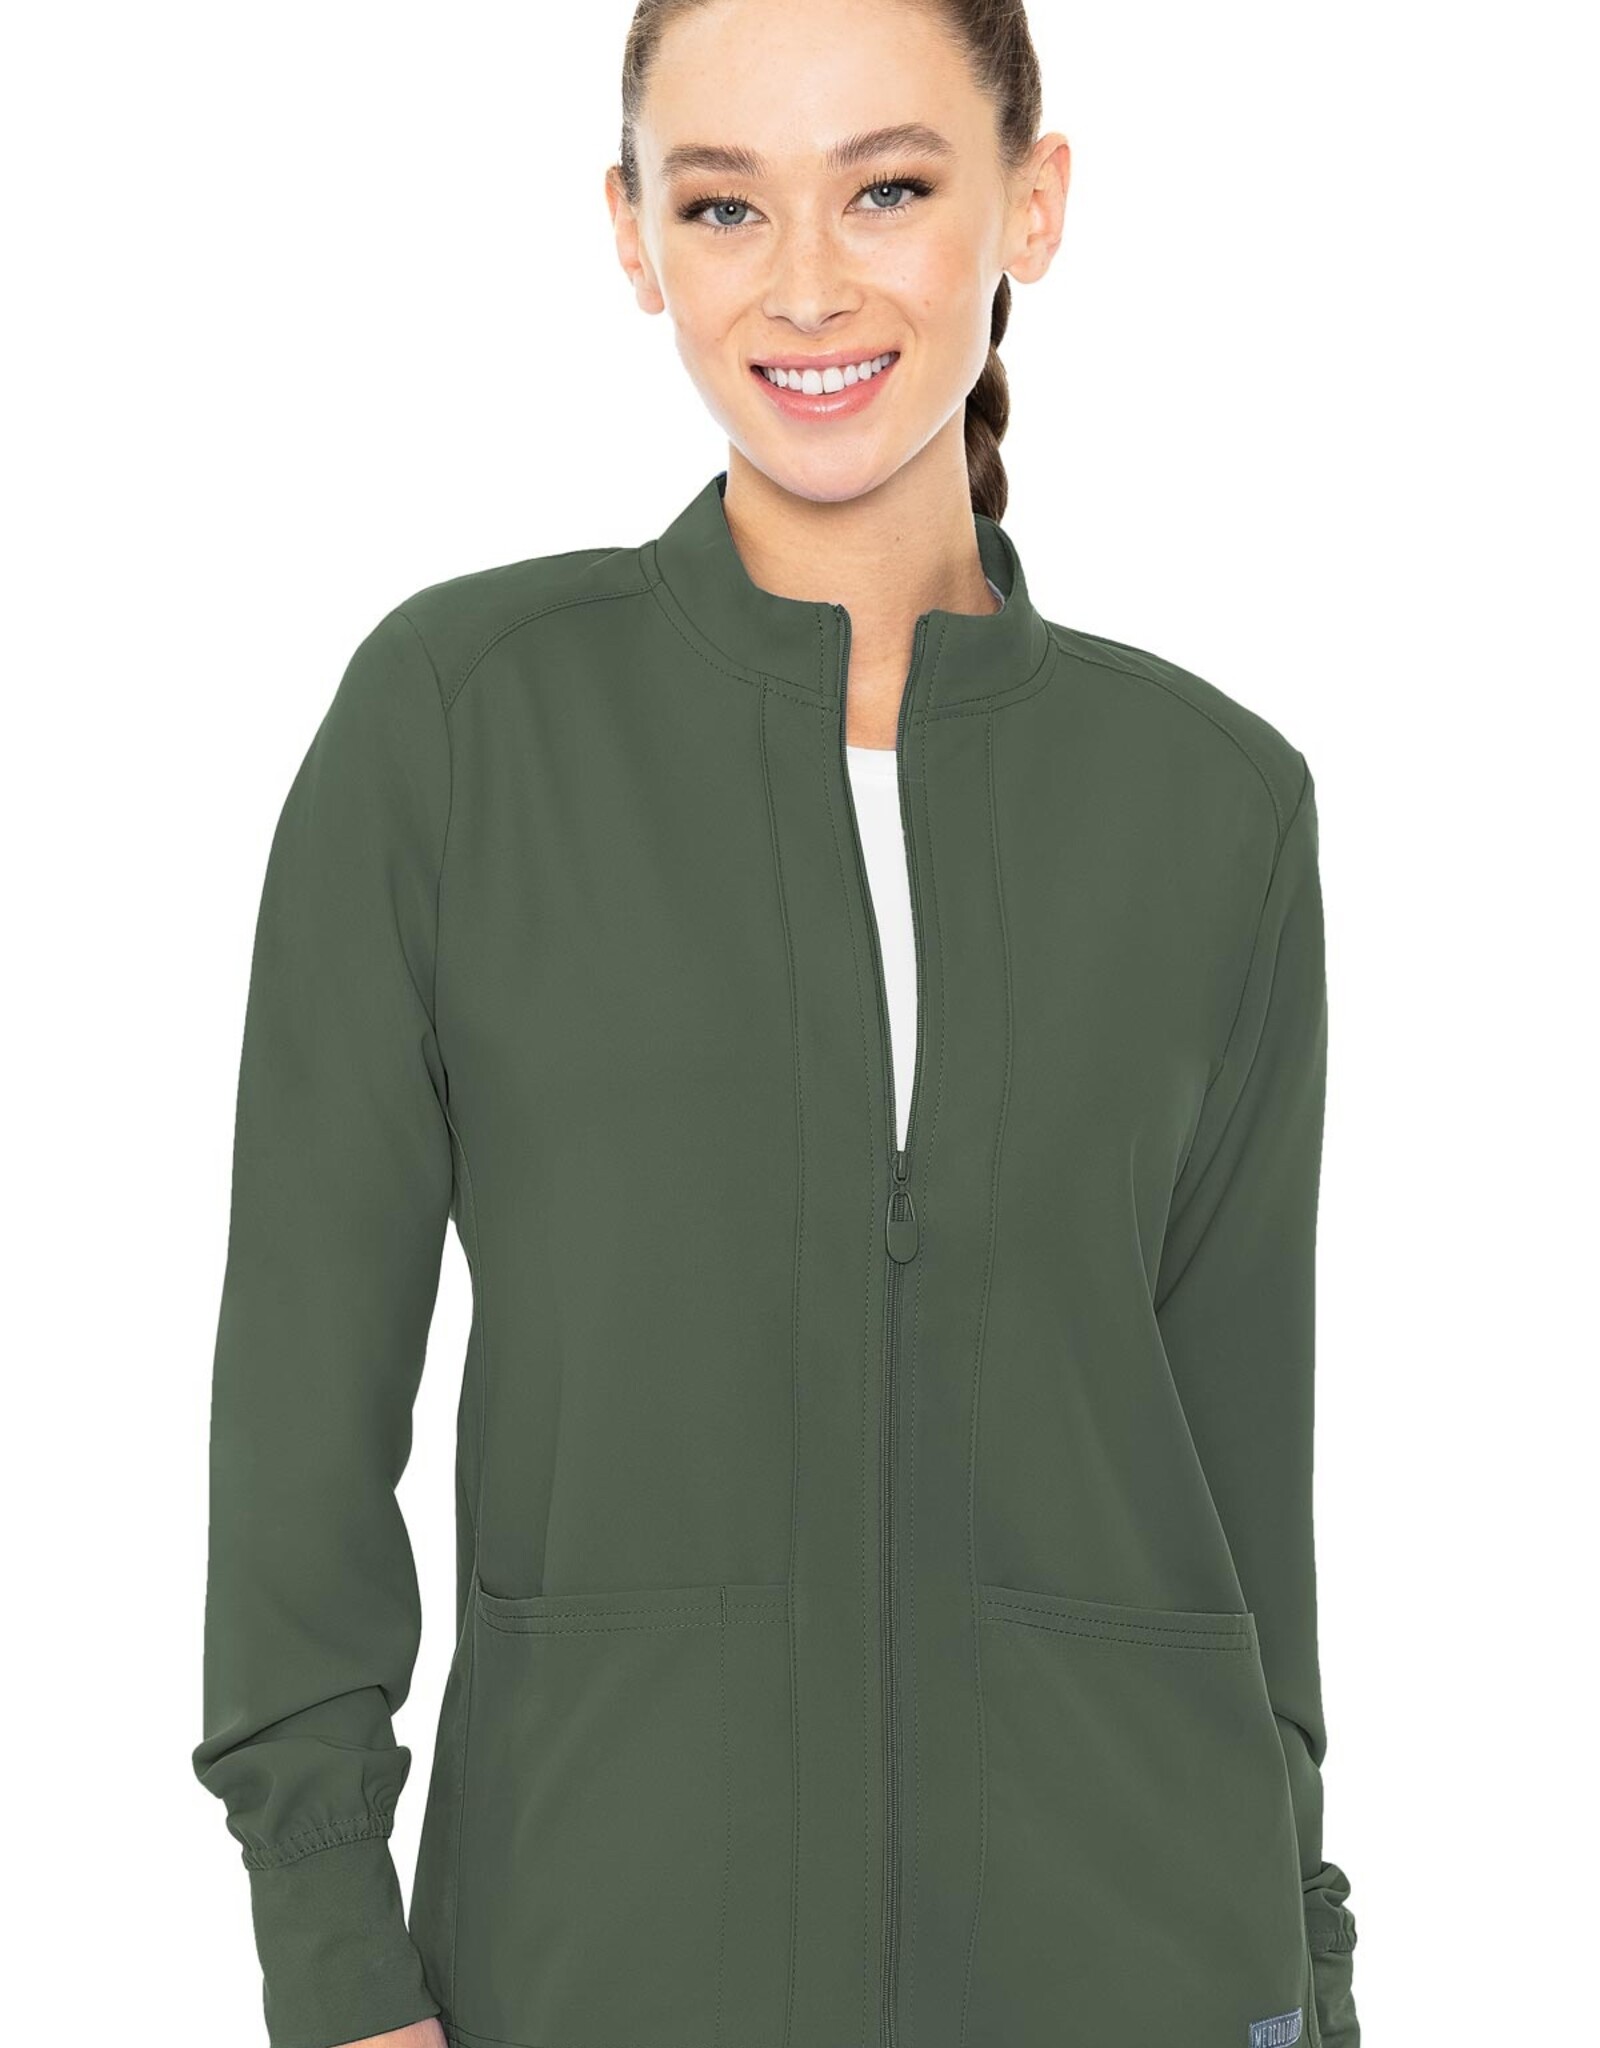 Med Couture Insight Women'sFront pocket Warm Up (Plus)